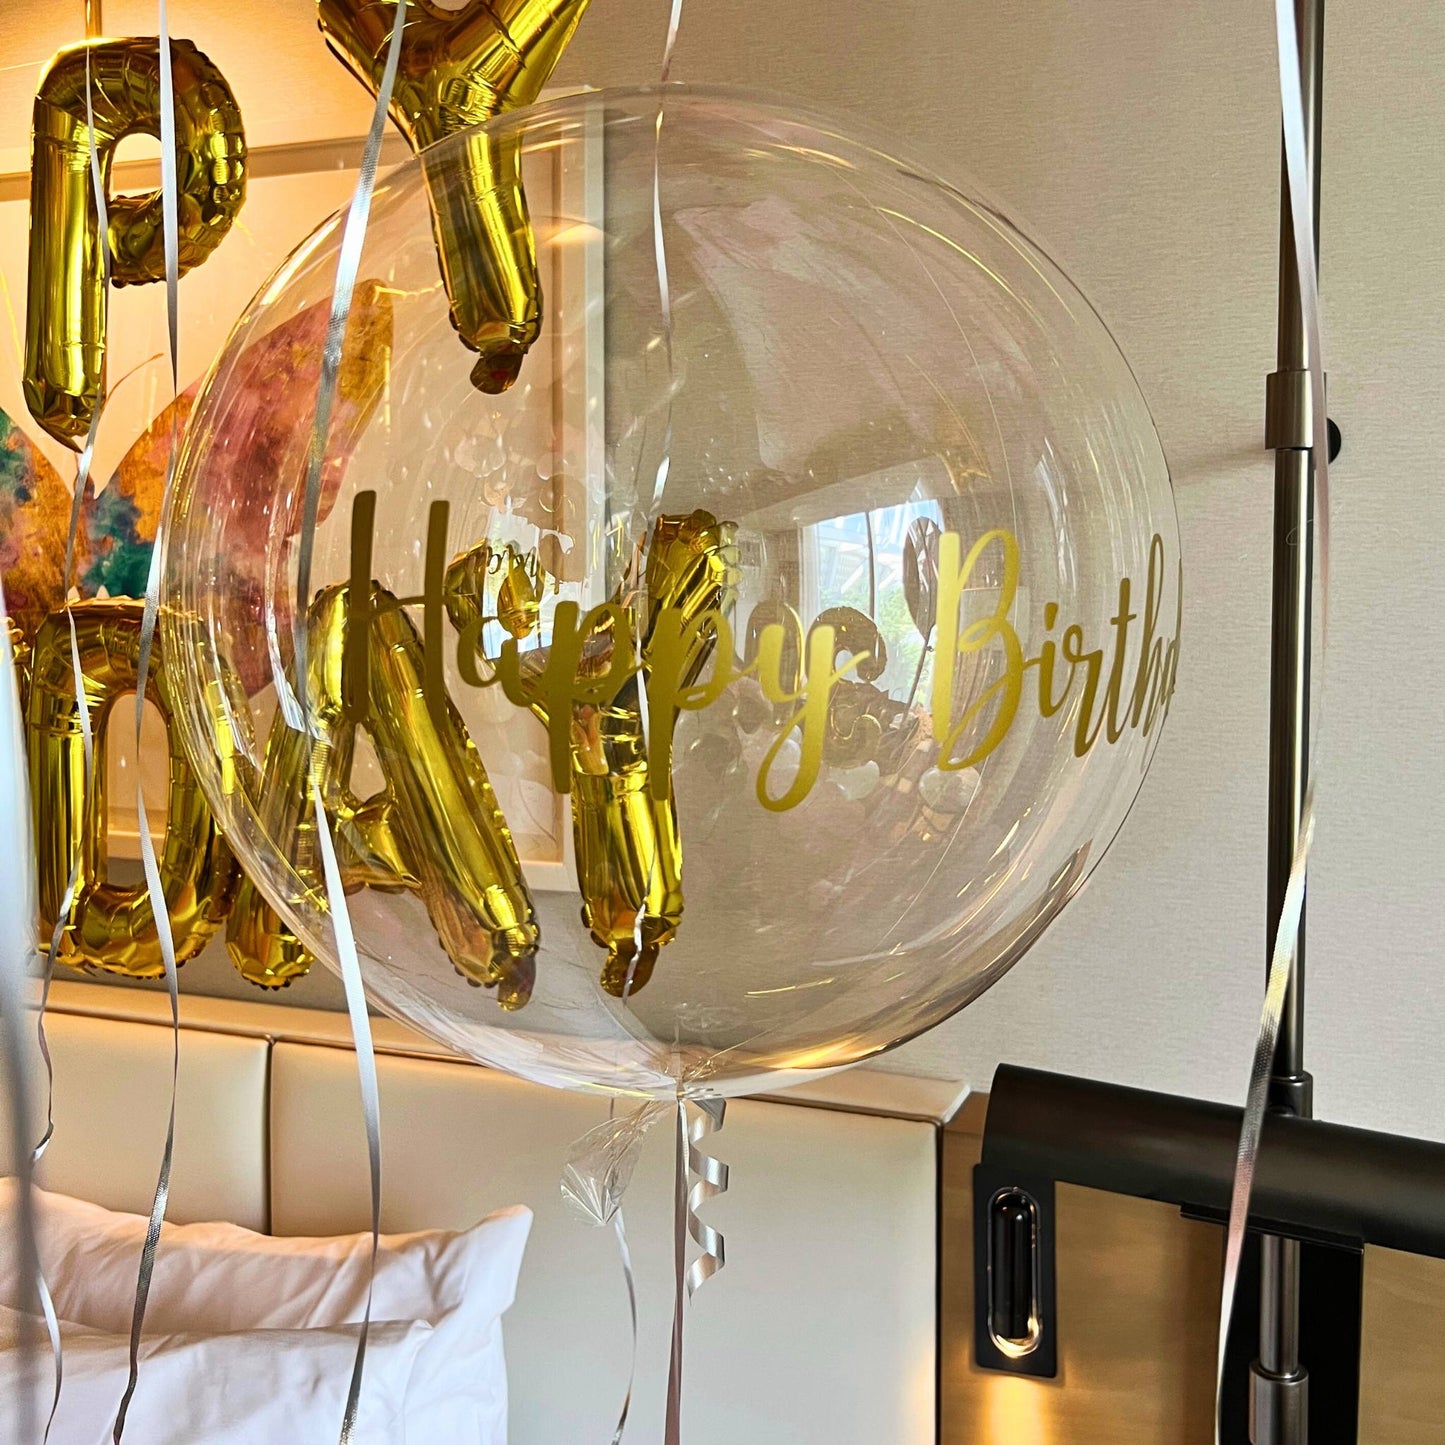 Bubble Balloon with Gold Happy birthday Text